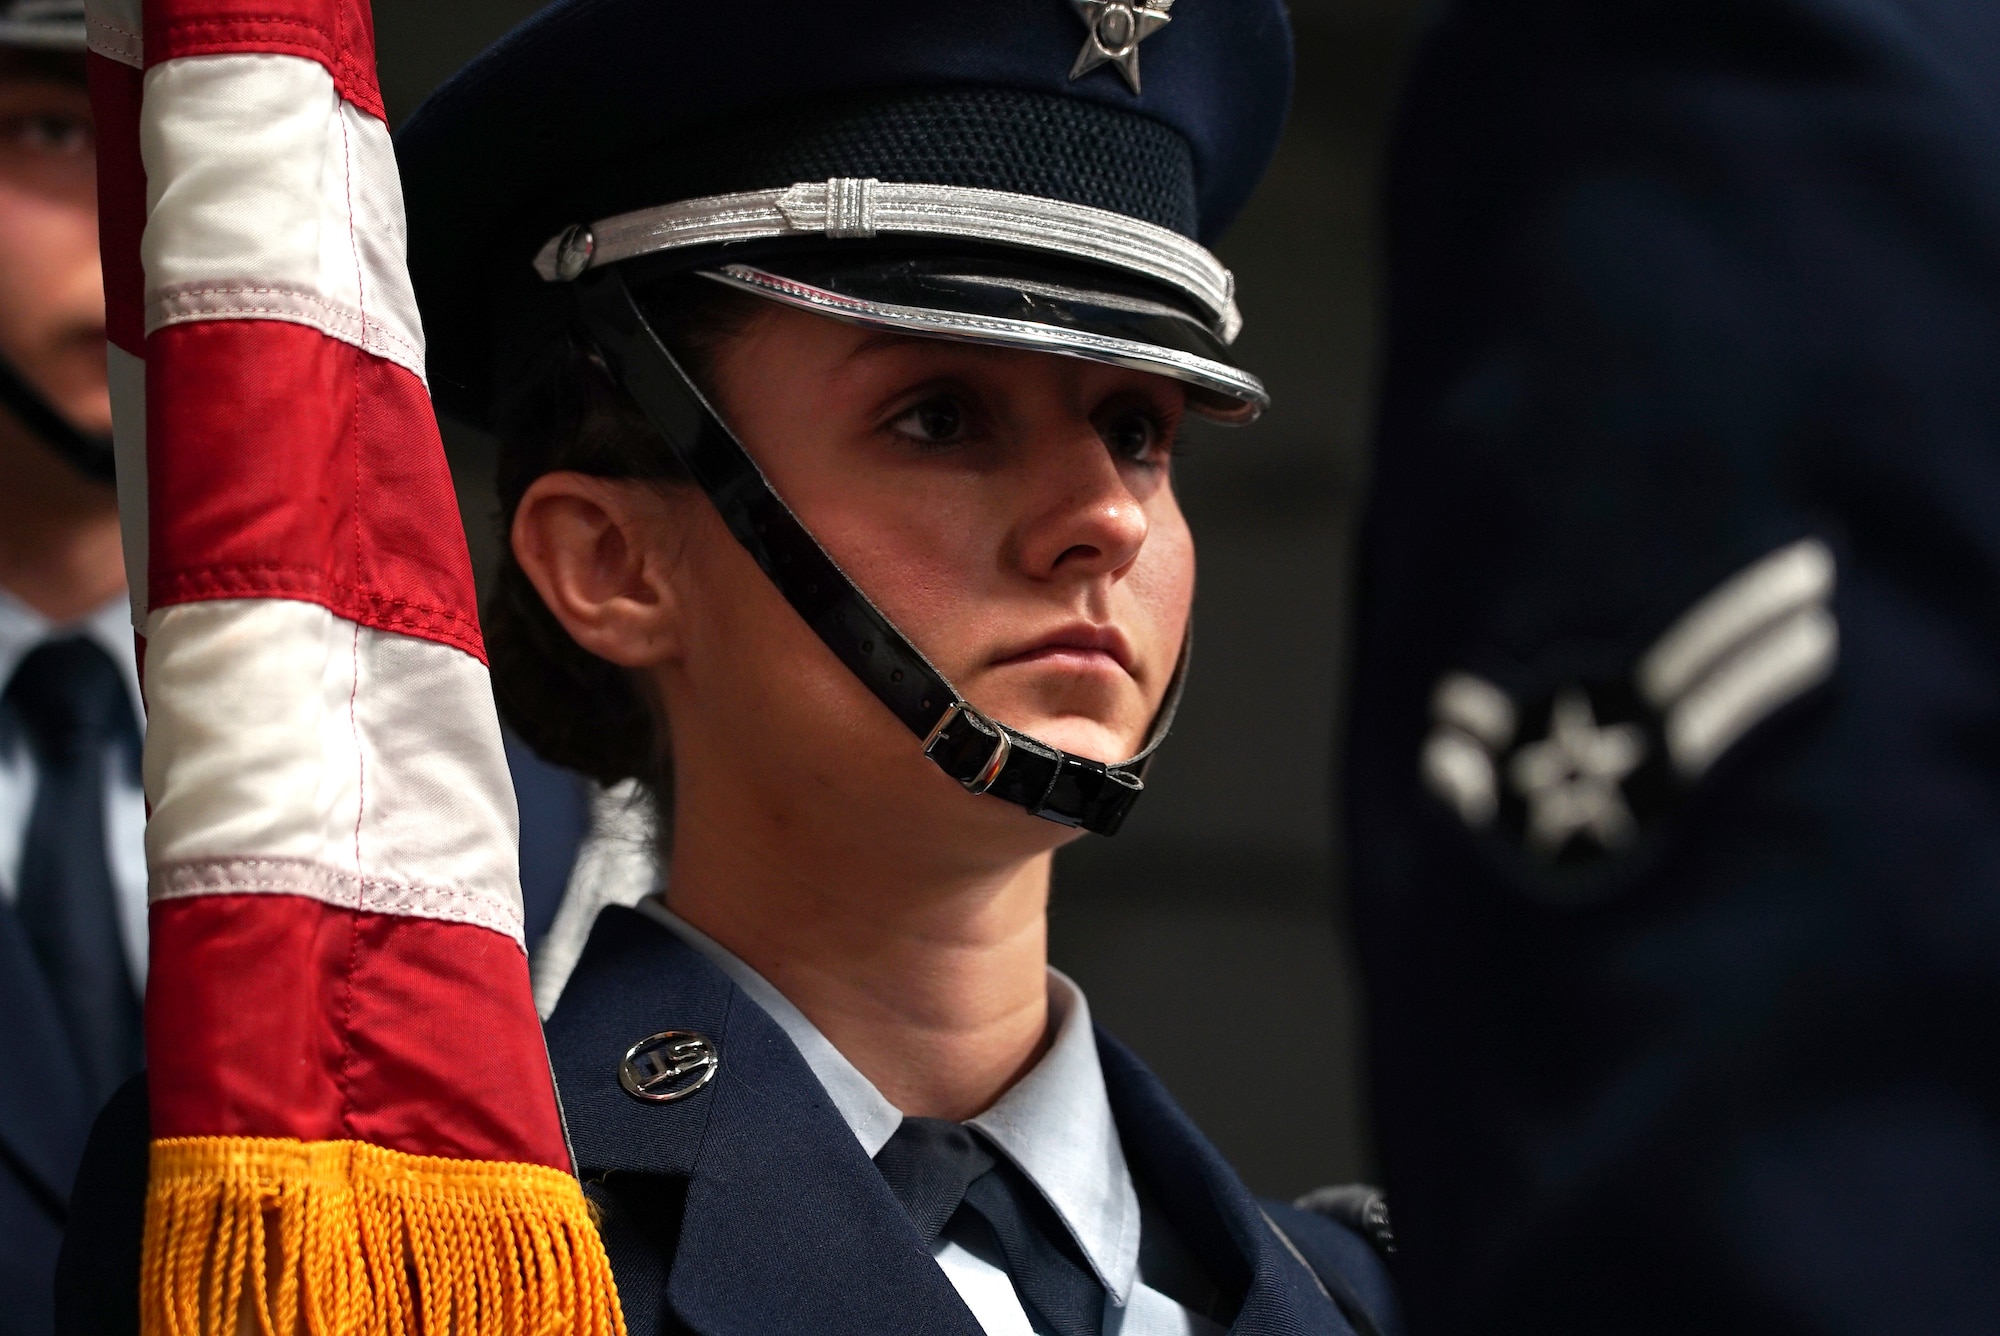 Airman 1st Class Hannah Galvin, 319th Reconnaissance Wing honor guardsman, stands ready Dec. 20, 2019, prior to a military working dog ceremony on Grand Forks Air Force Base, North Dakota. The ceremony was held in memory of MWD “Dex,” who worked with the 319th Security Forces Squadron for five years as a narcotic detector dog. (U.S. Air Force photo by Senior Airman Elora J. Martinez)